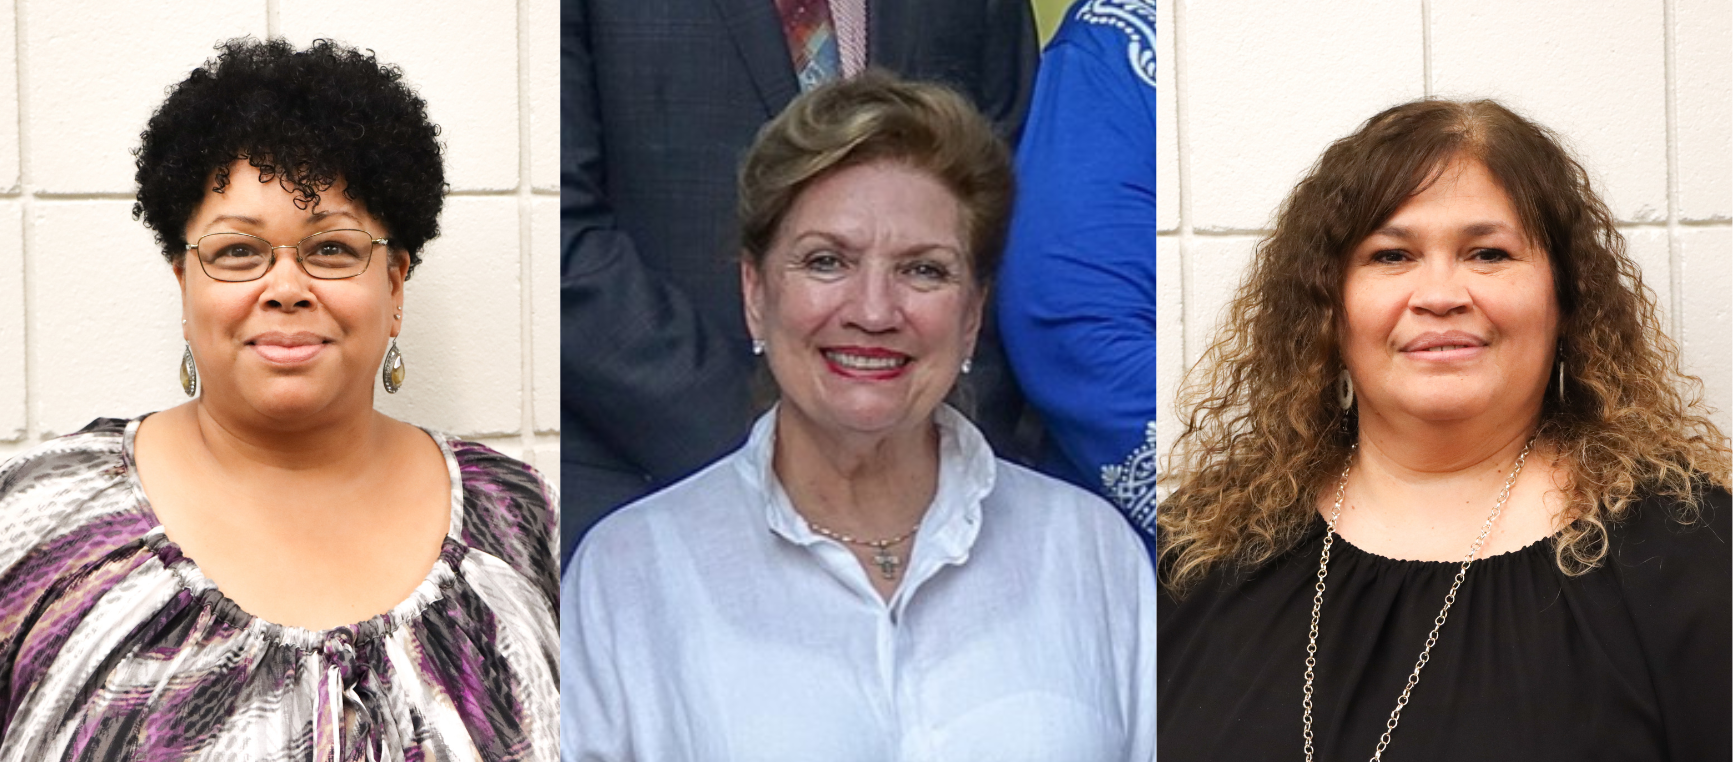 Three SCC Foundation Directors Complete Service Terms